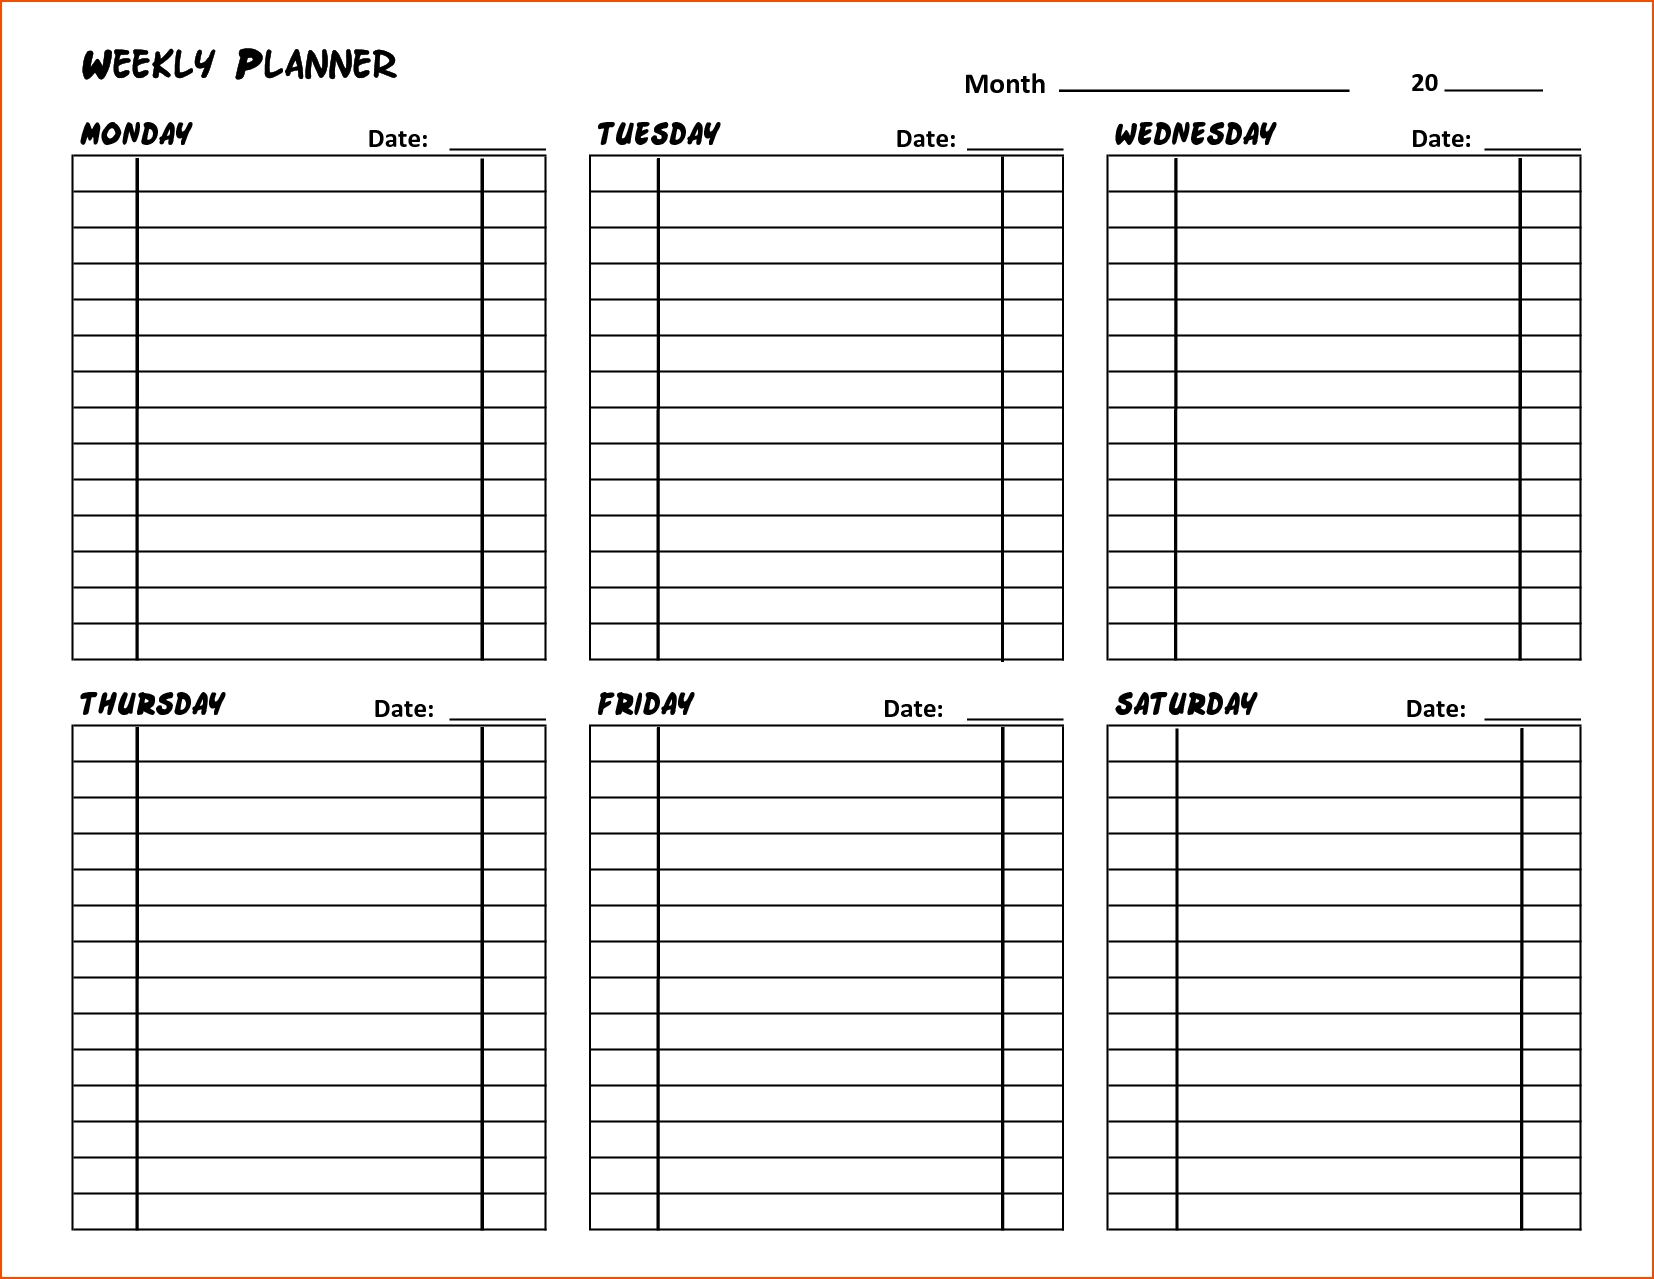 Weekly Vity Planner Template Childrens Excel Calendar Planning | Smorad regarding Excel Calendar By Day For Planning